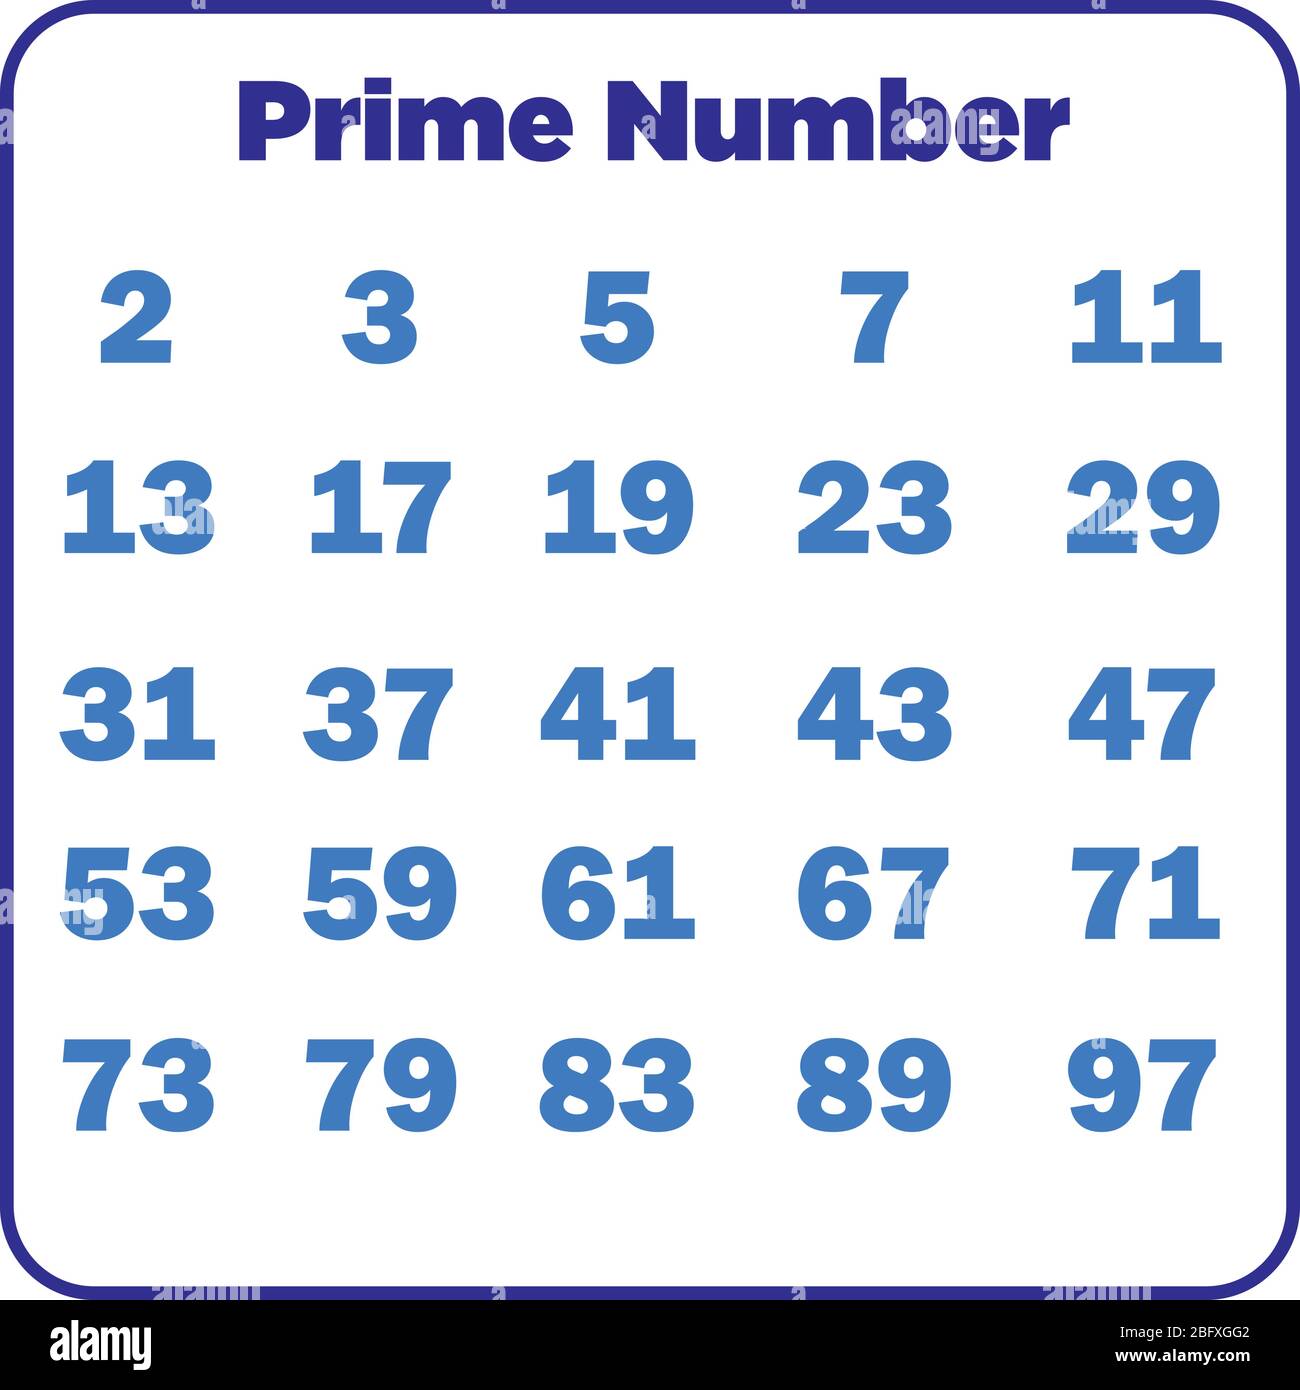 prime-numbers-up-to-100-prime-numbers-1-to-100